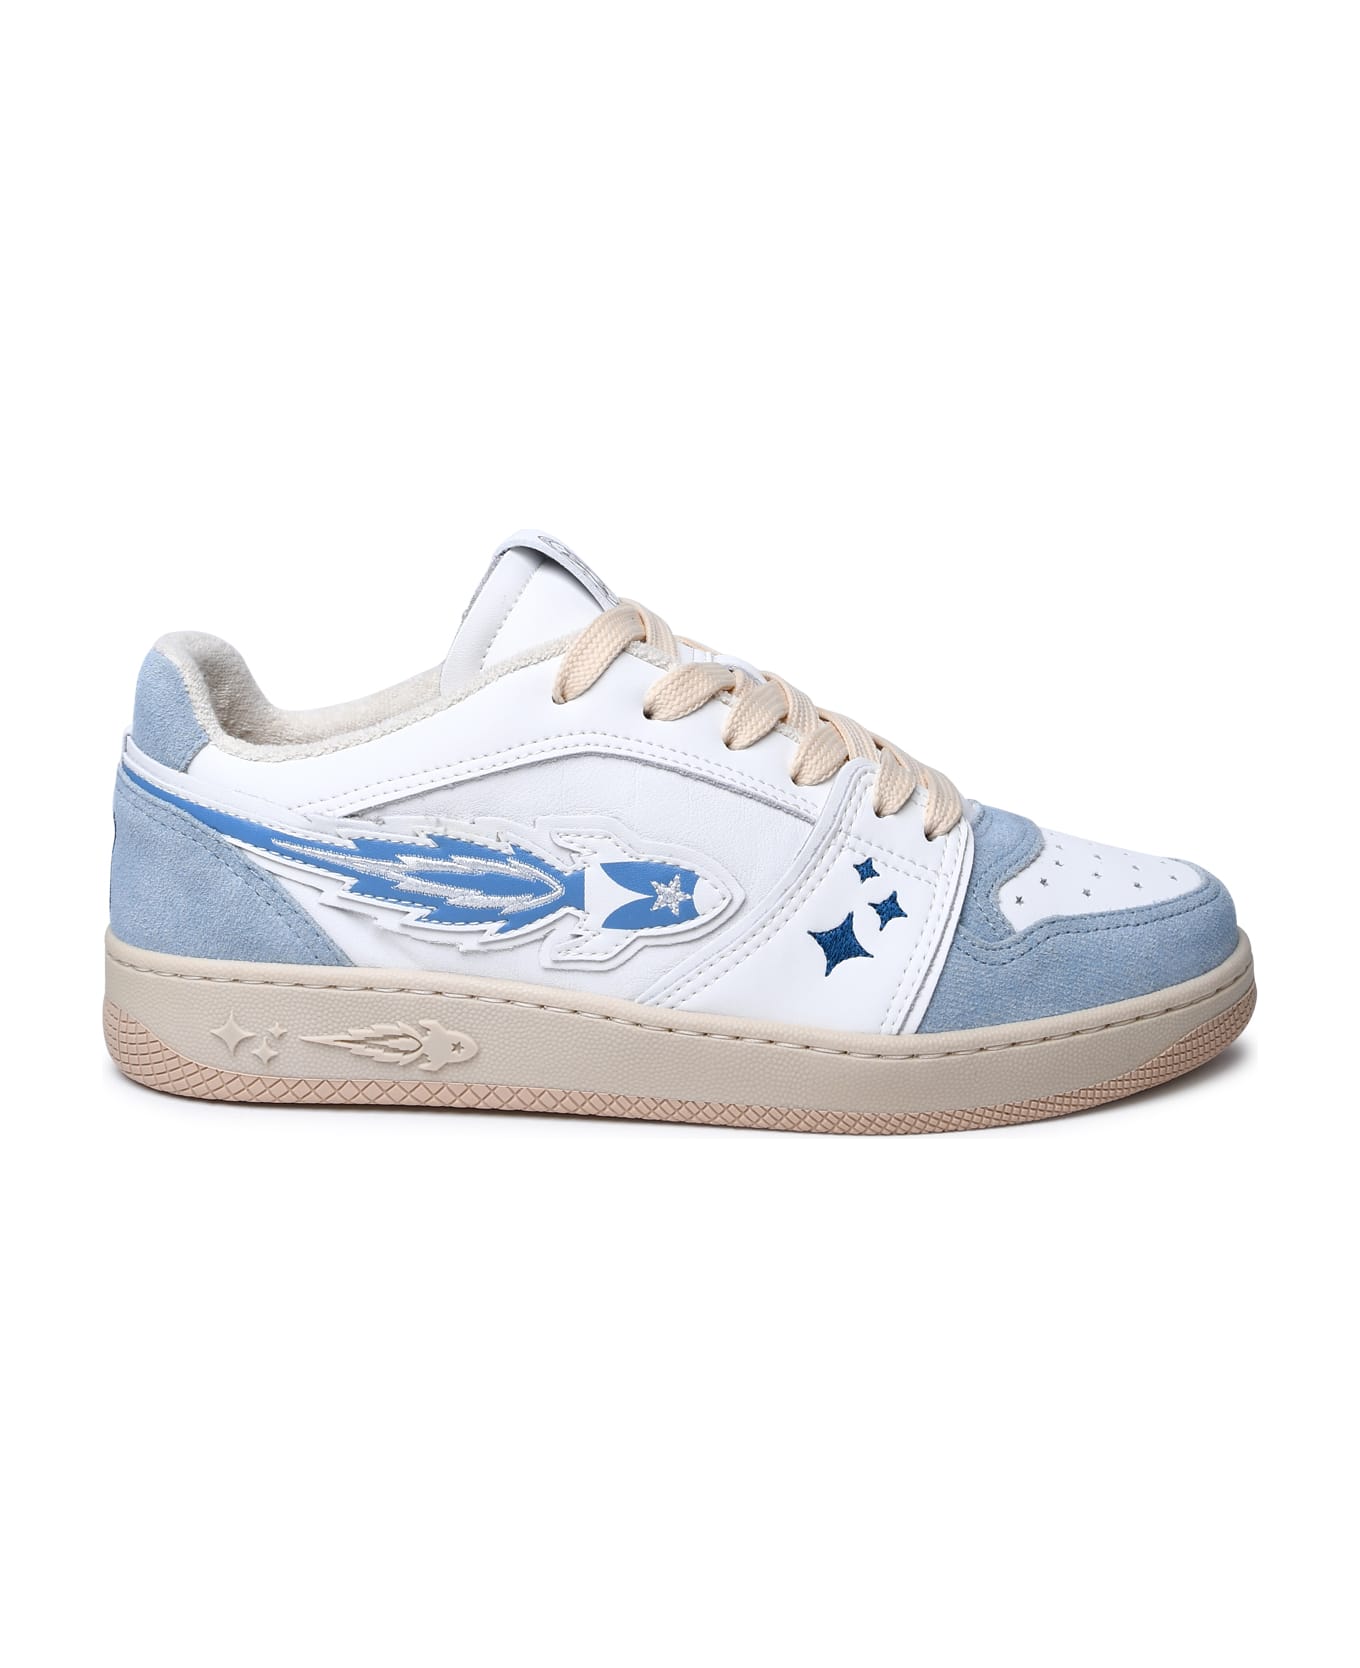 Enterprise Japan Two-tone Leather Sneakers - White スニーカー